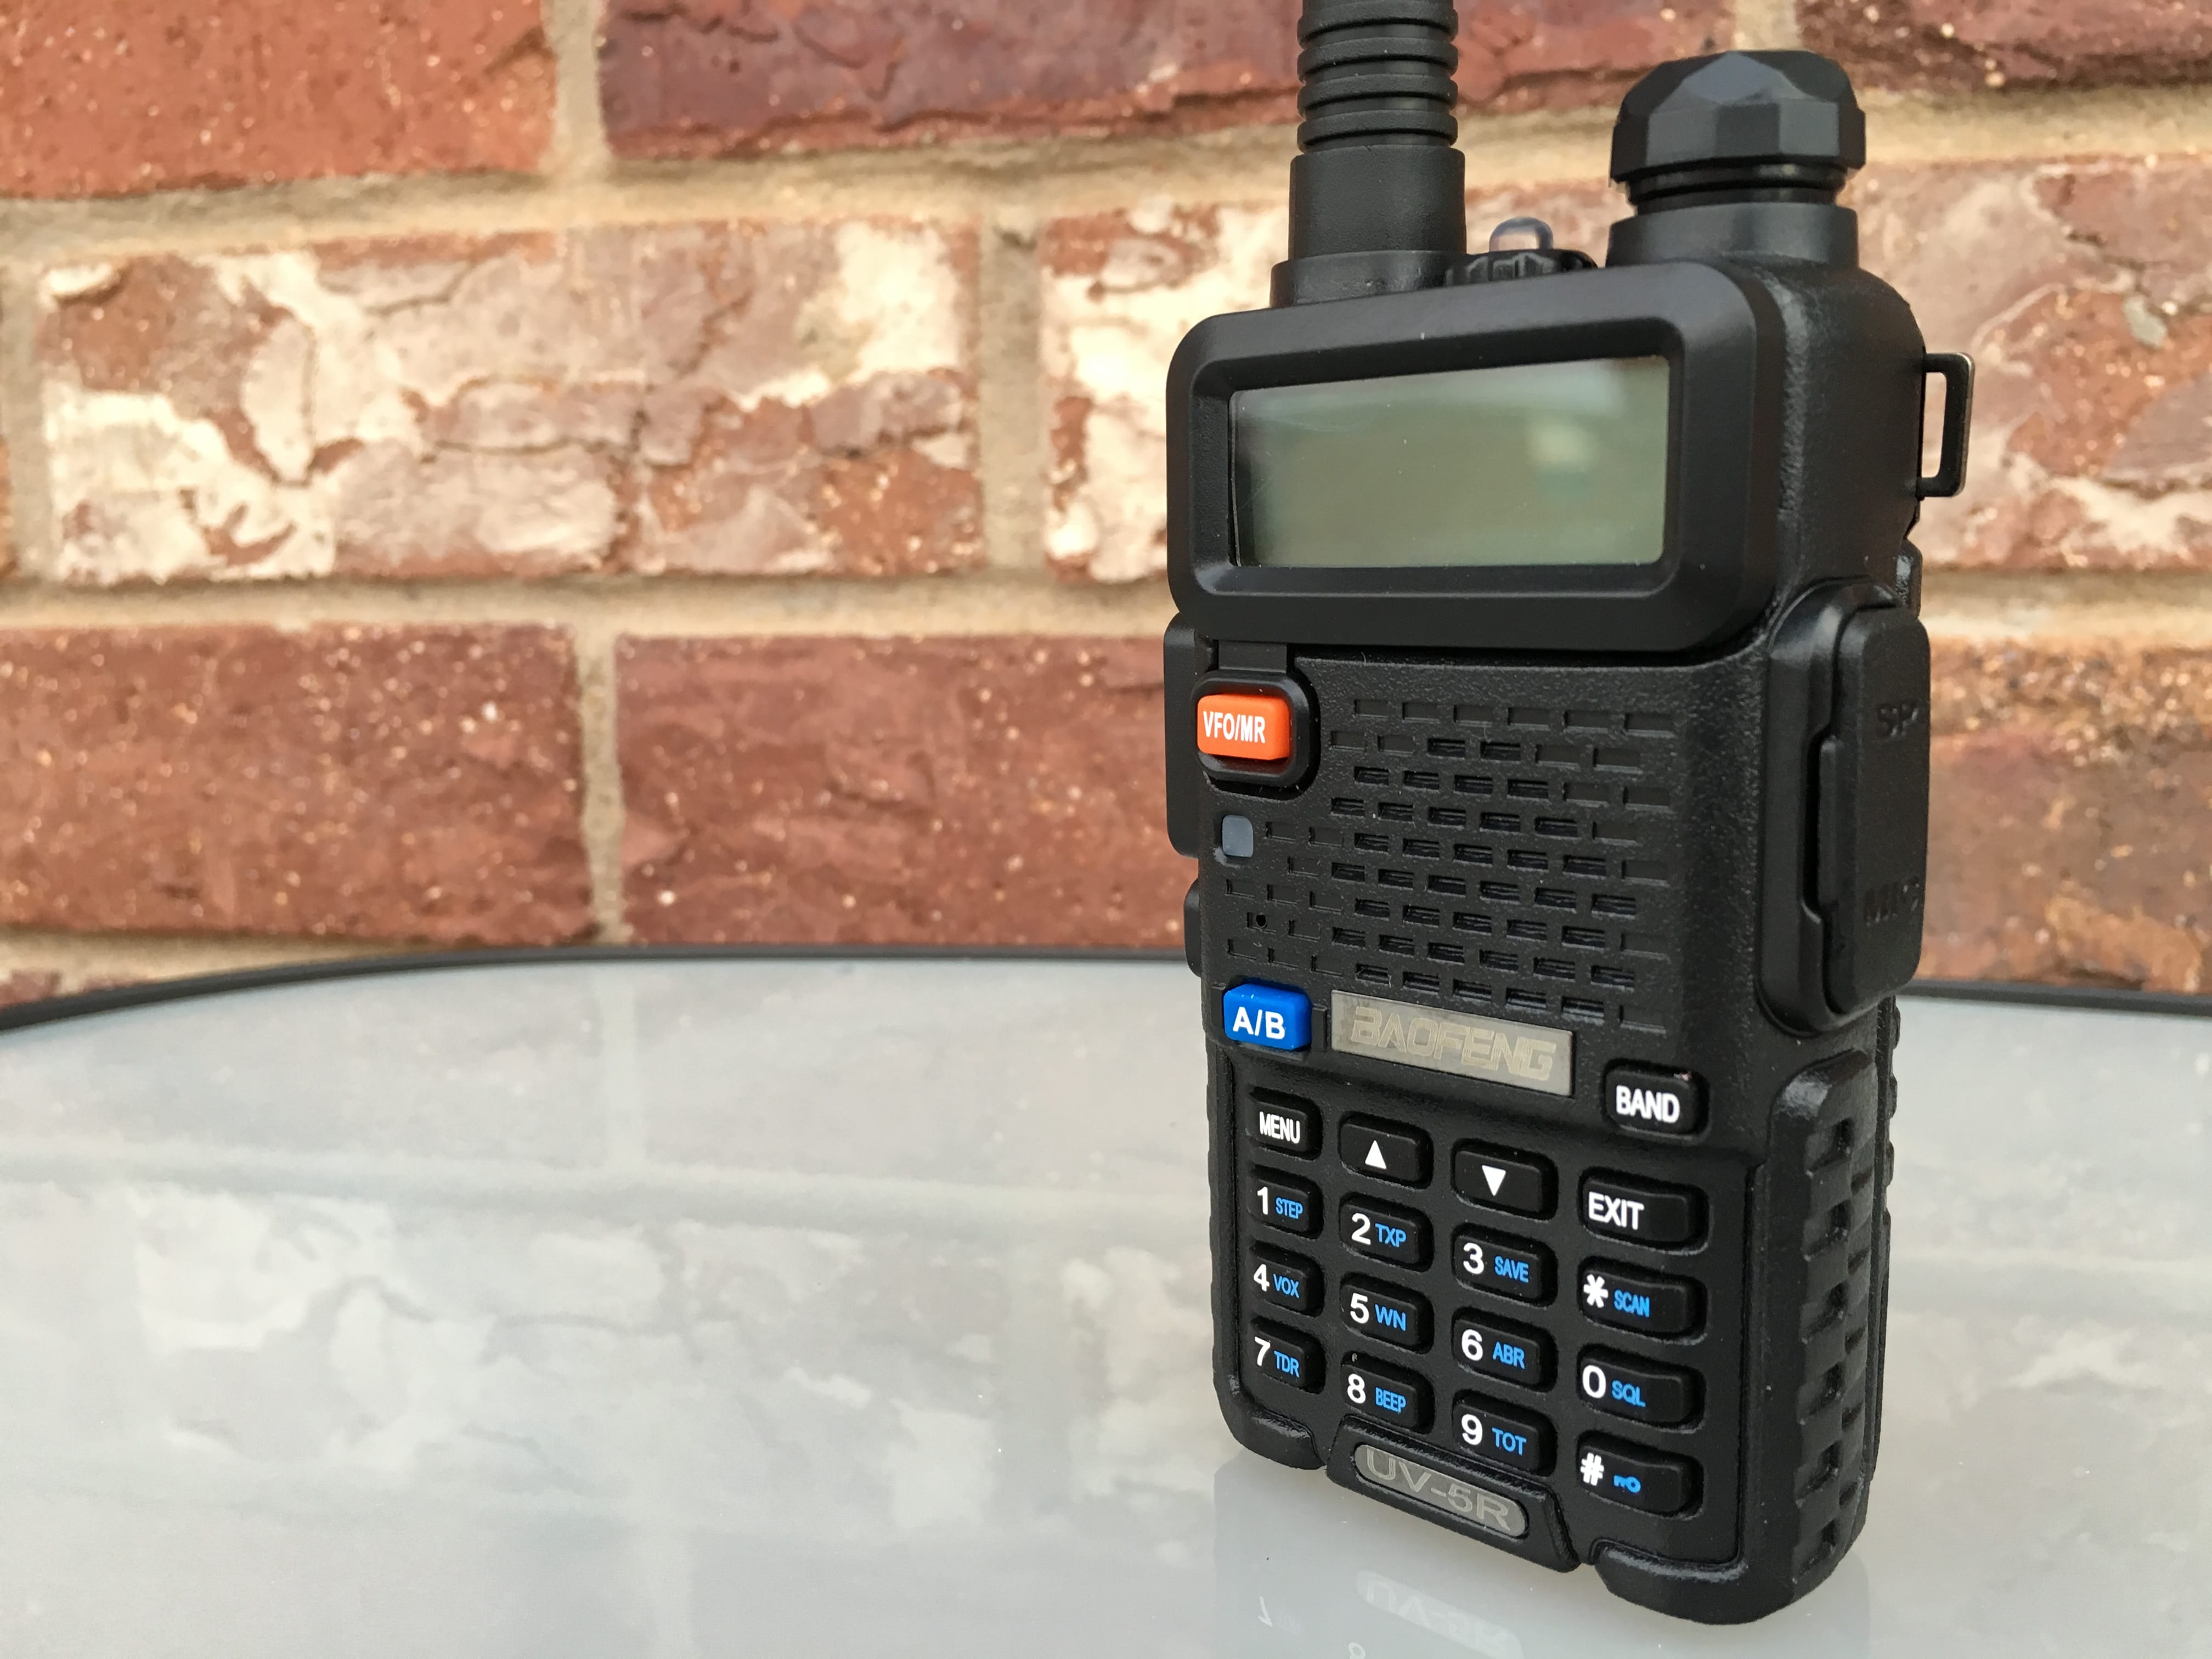 Baofeng UV-5R: the Classic Chinese Handheld